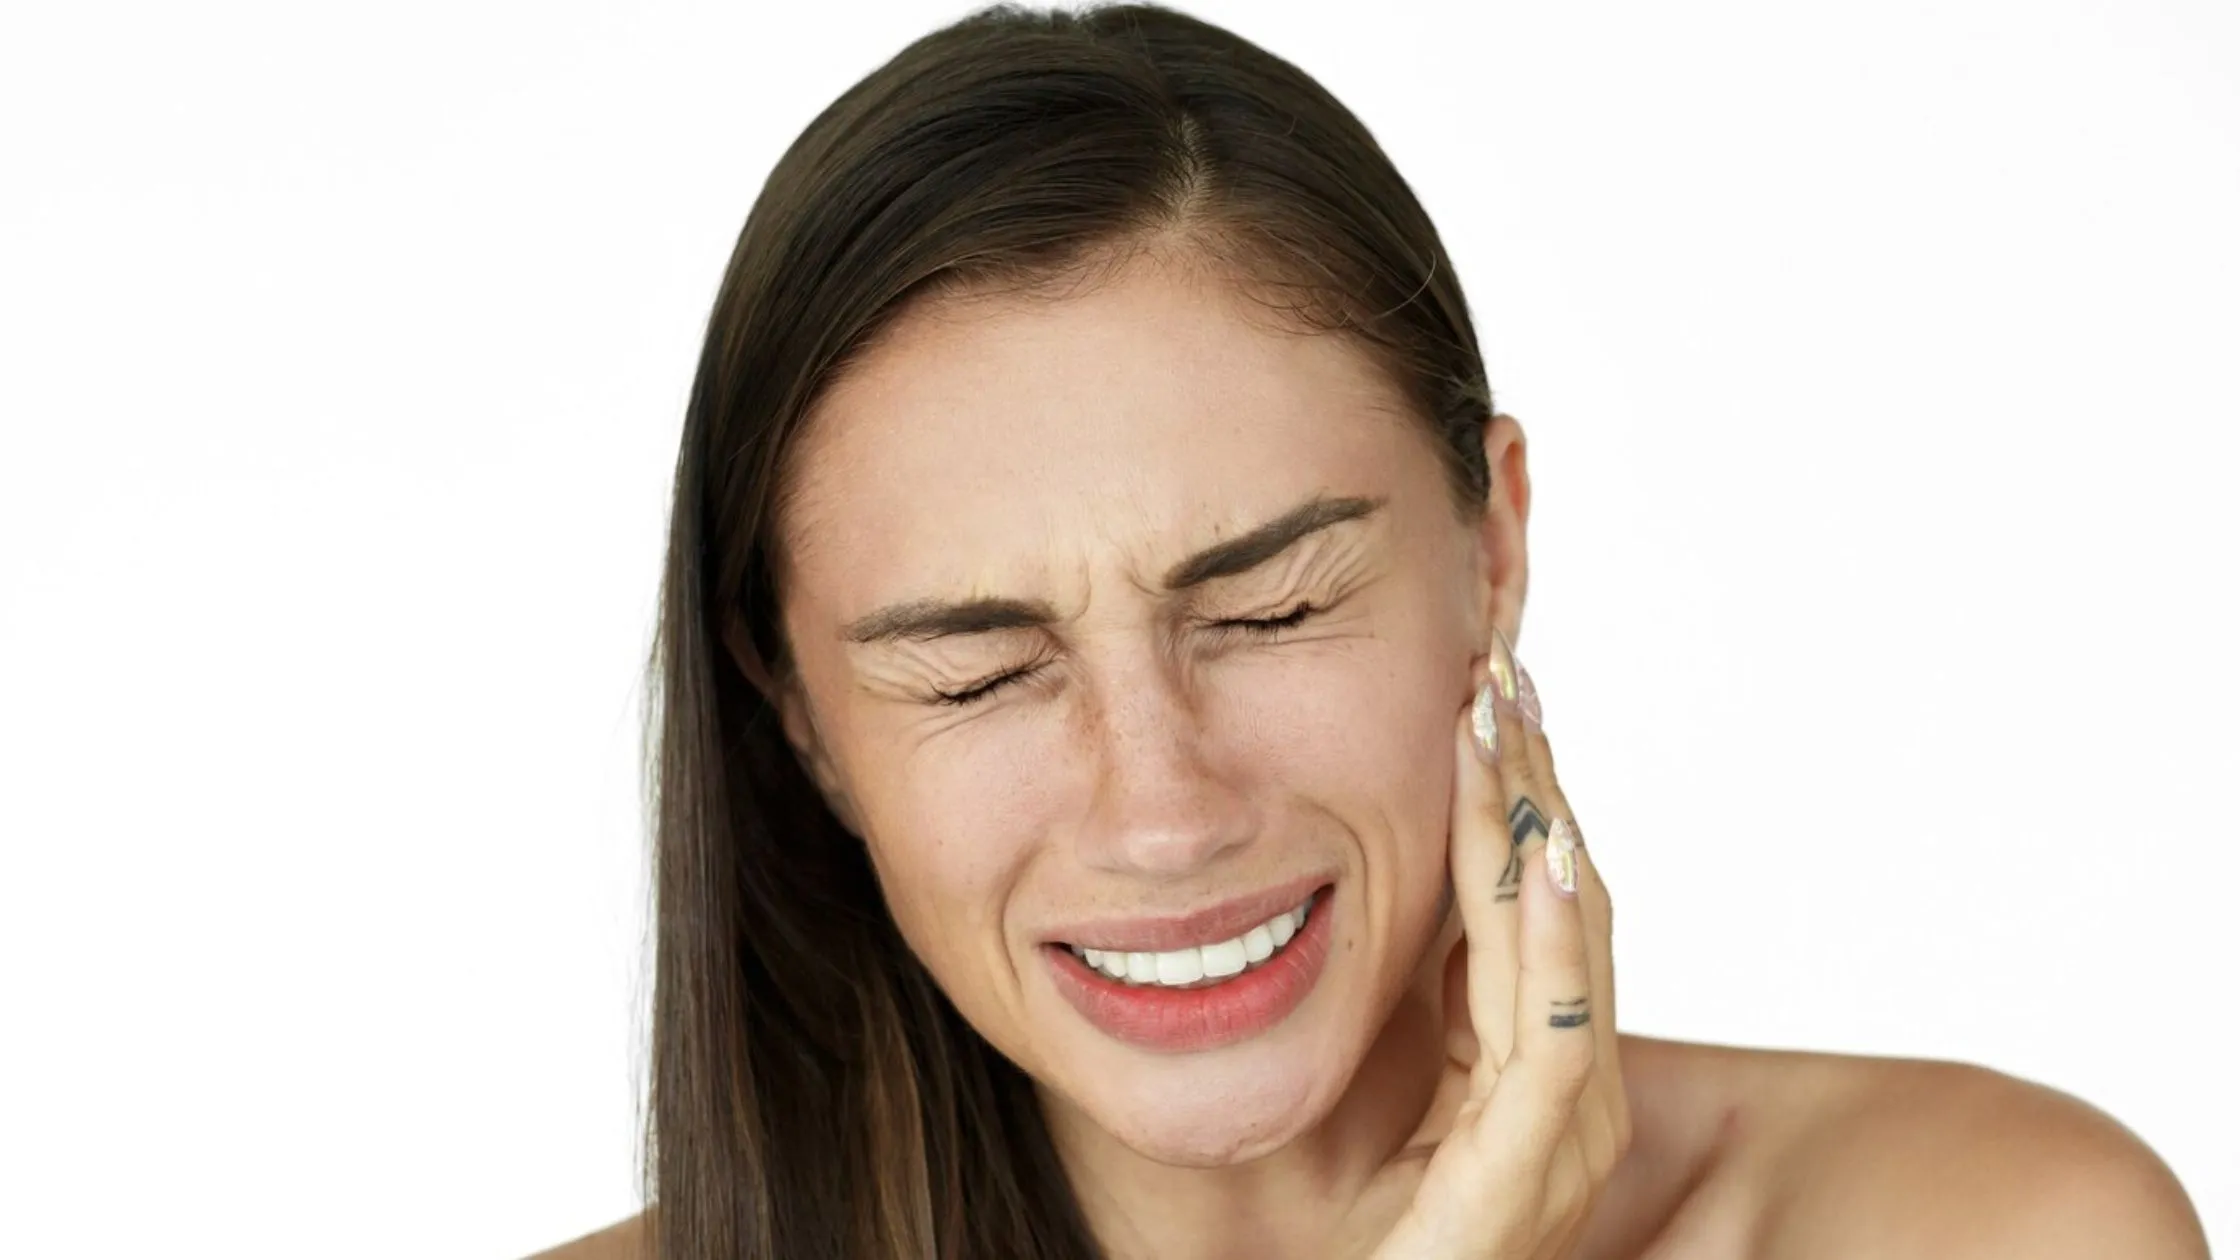 Can You Kill Tooth Pain Nerve in 3 Seconds Permanently?